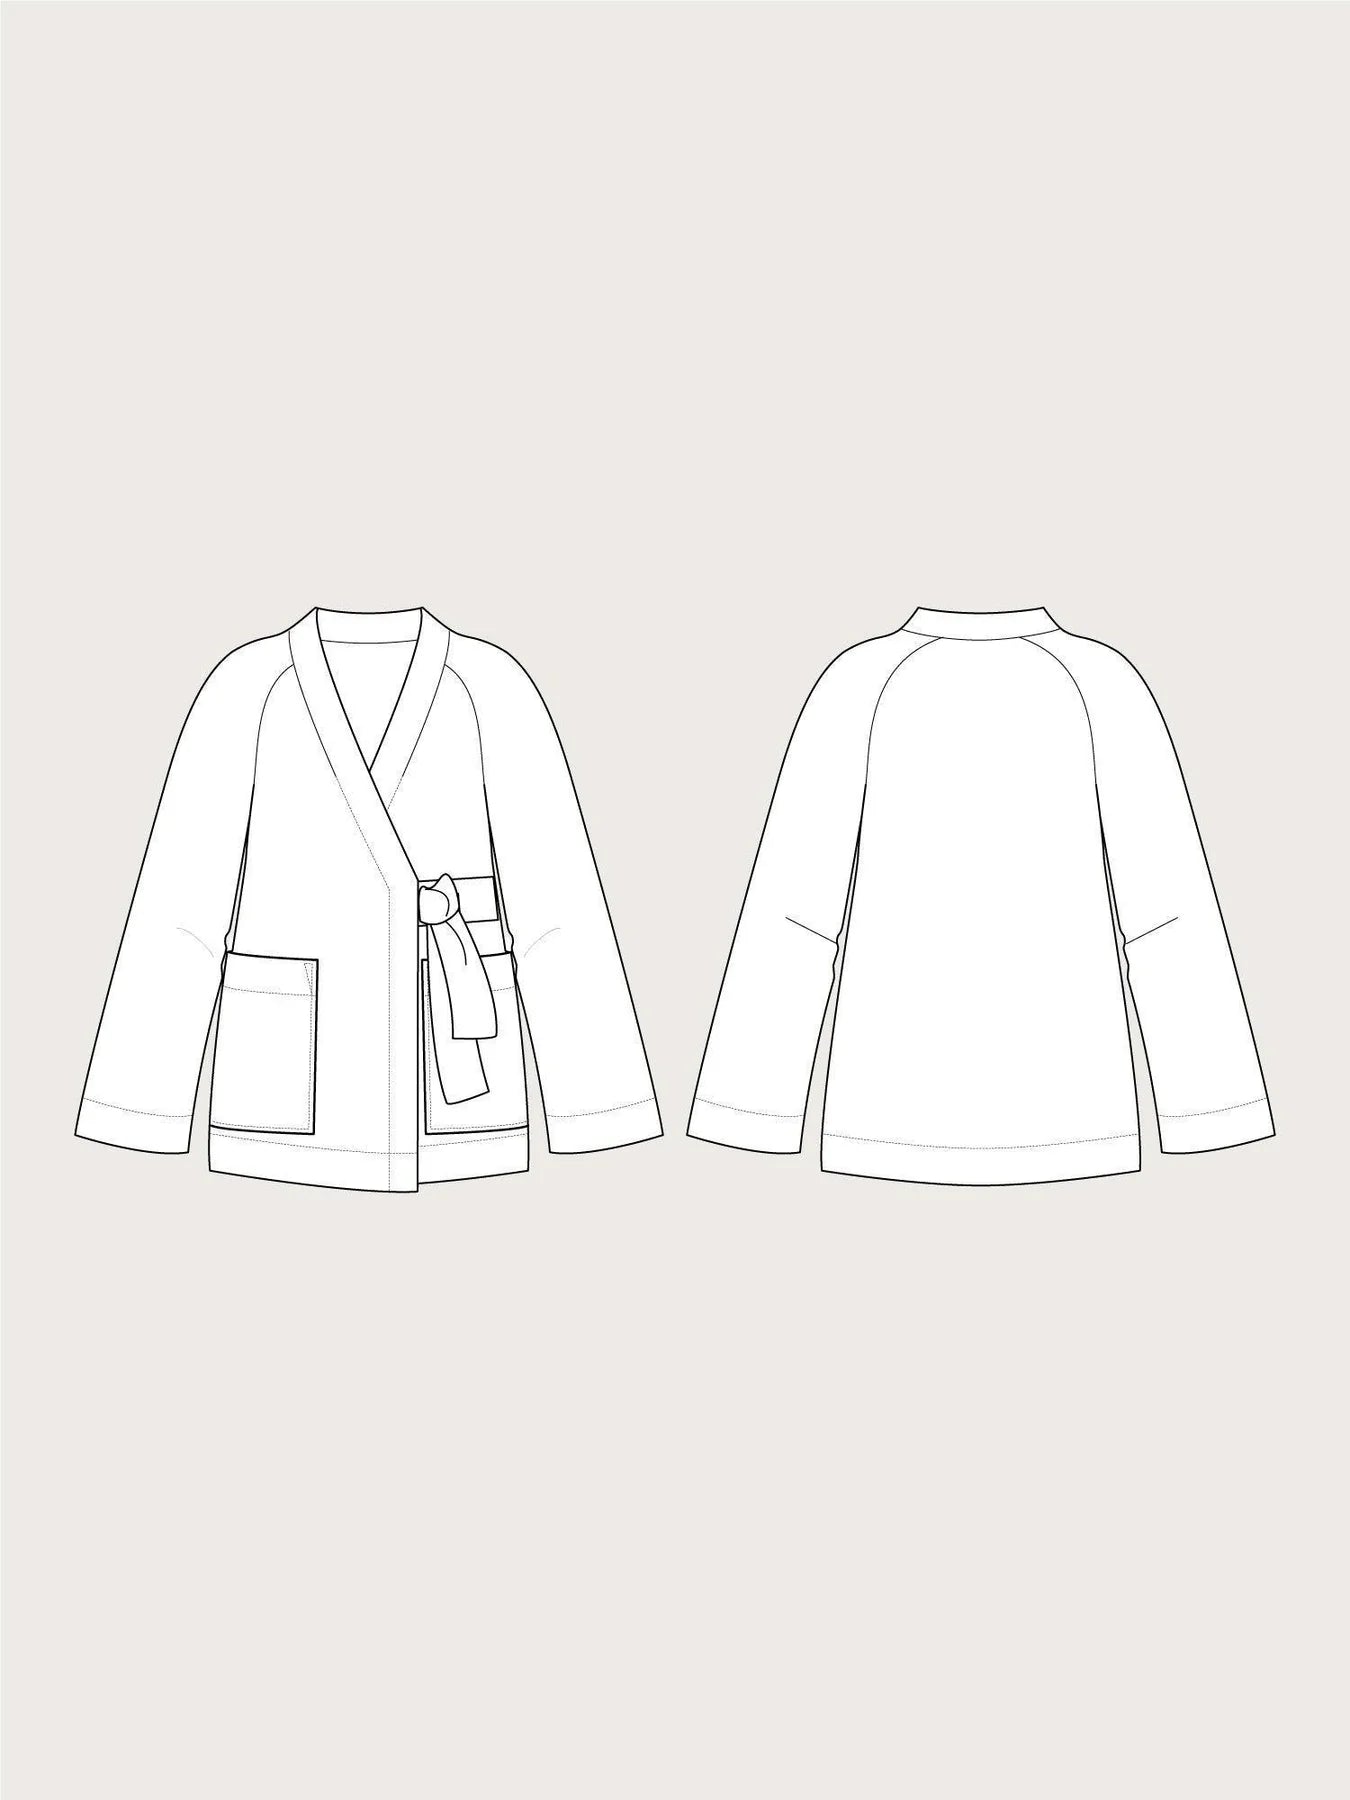 Wrap Jacket - Sewing Pattern | The Assembly Line